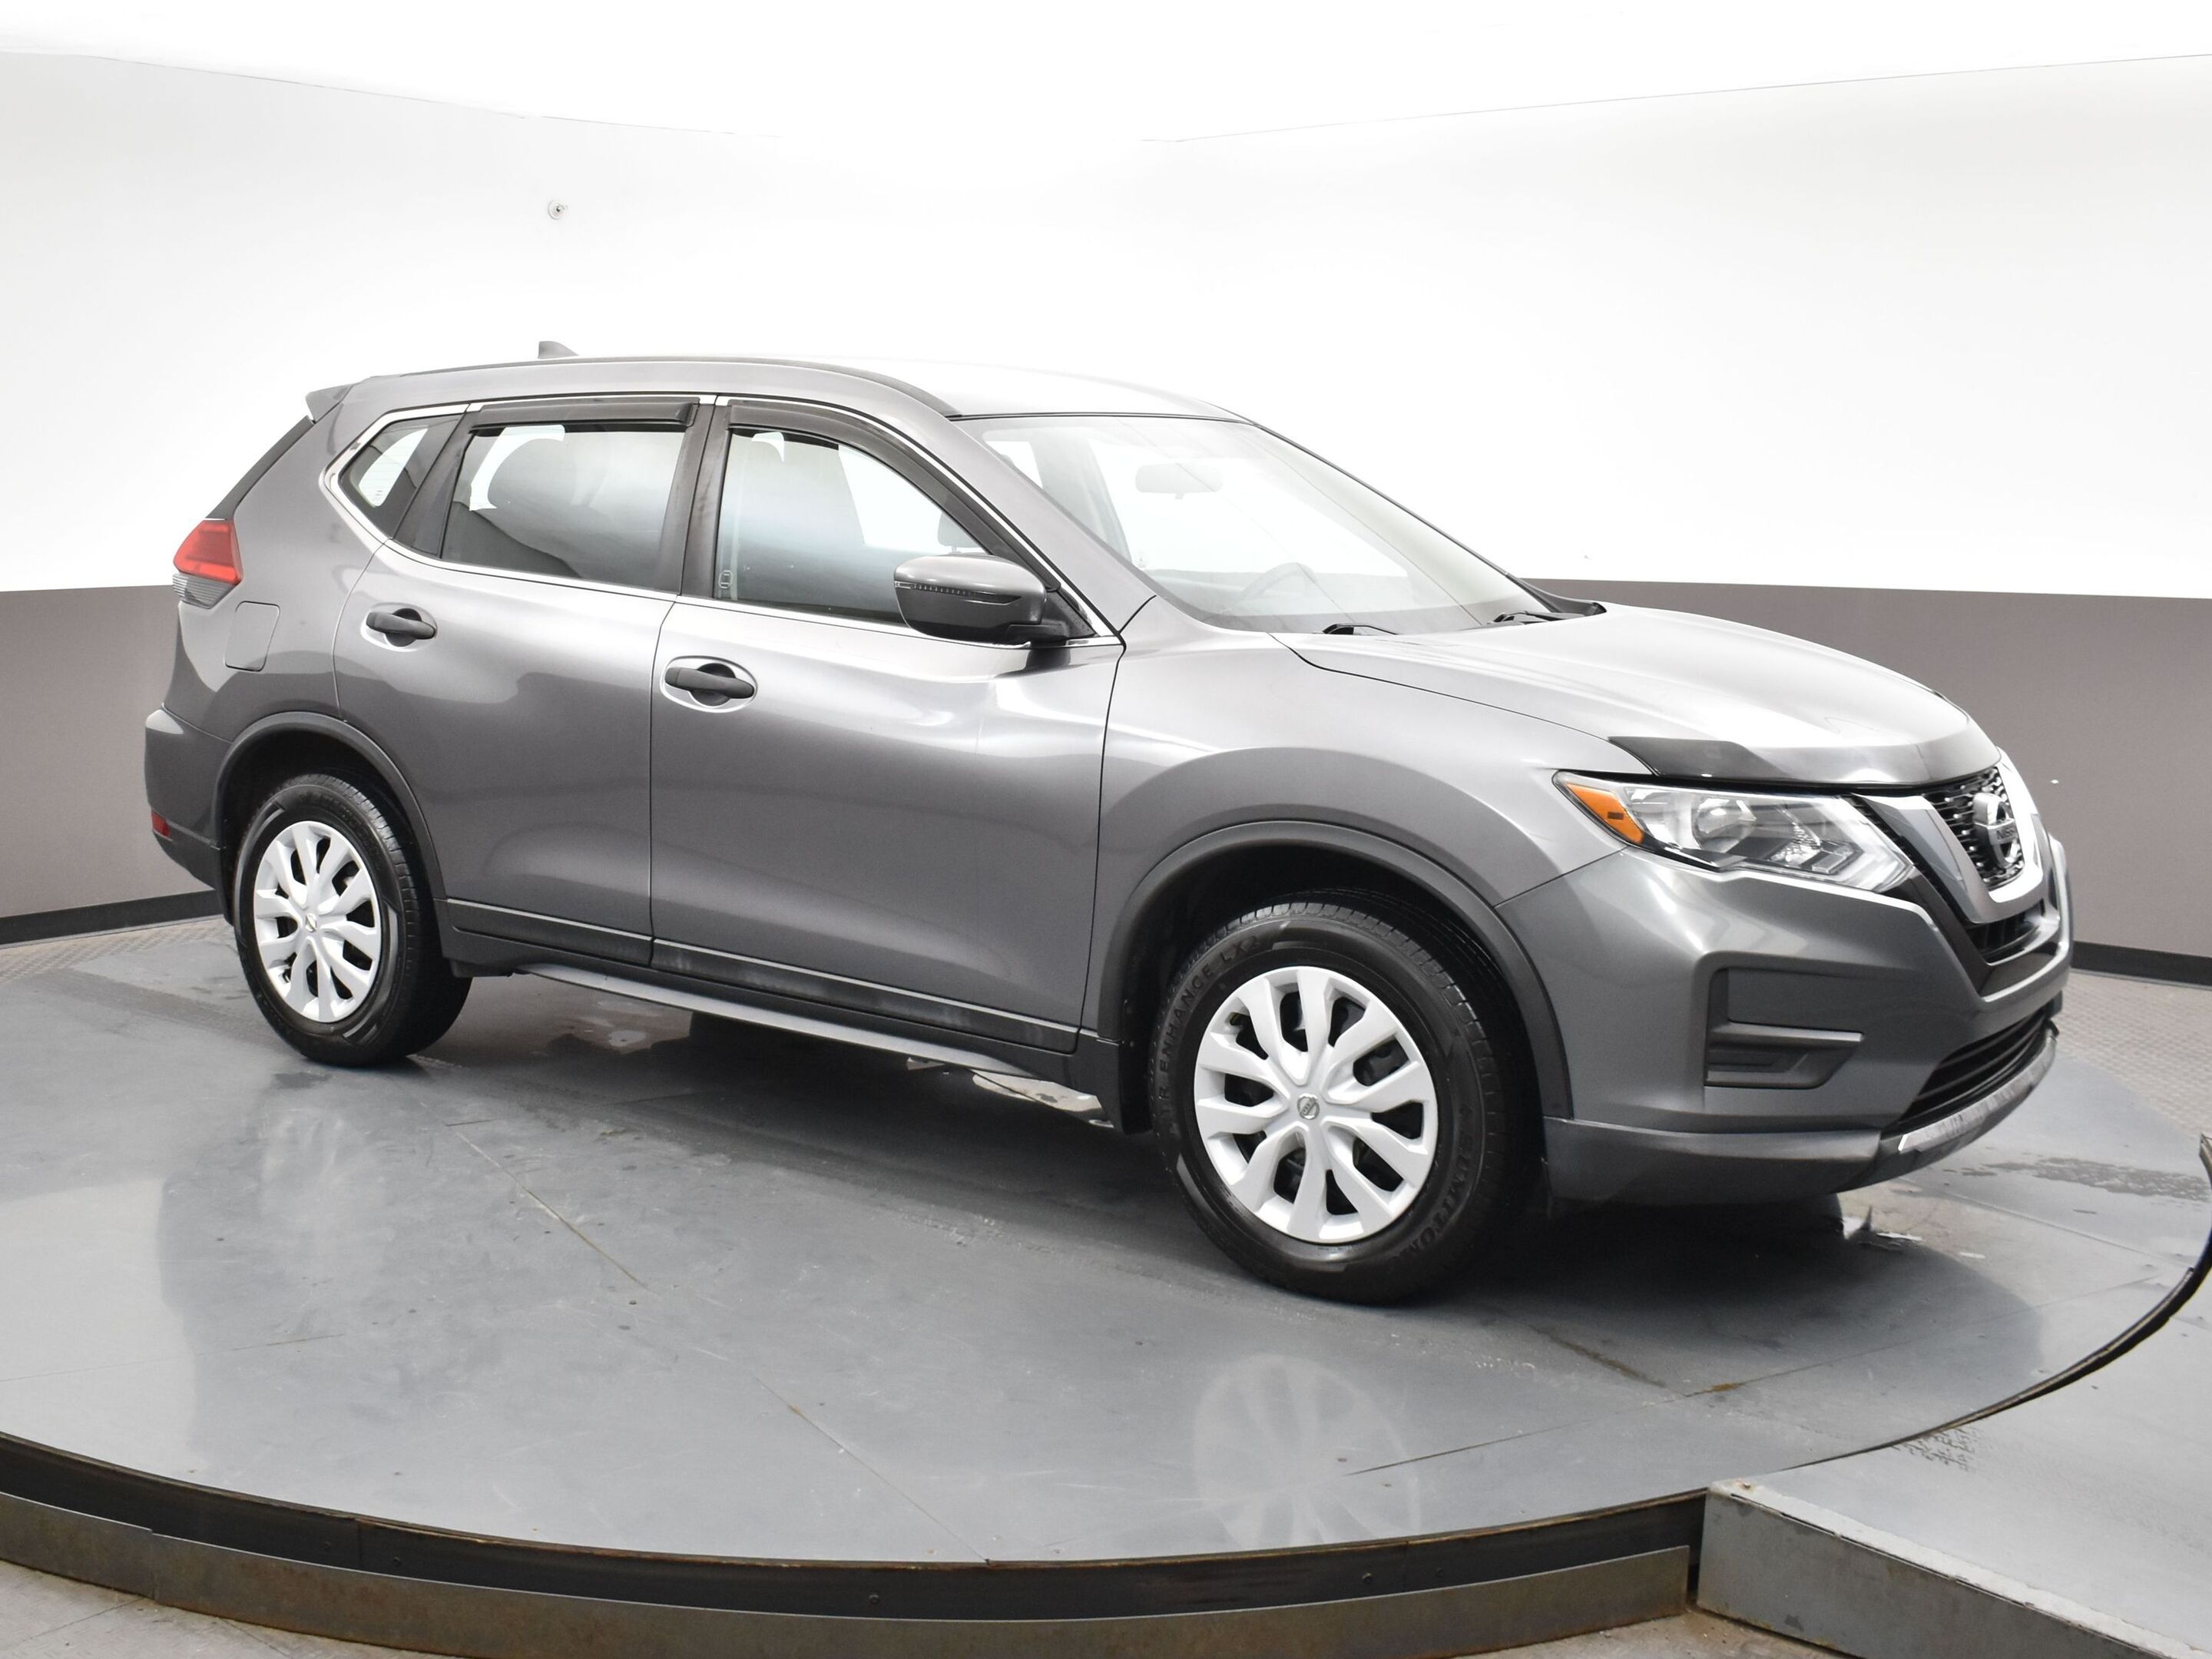 2017 Nissan Rogue S AWD with HEATED SEATS, BACK UP CAMERA, CD PLAYER